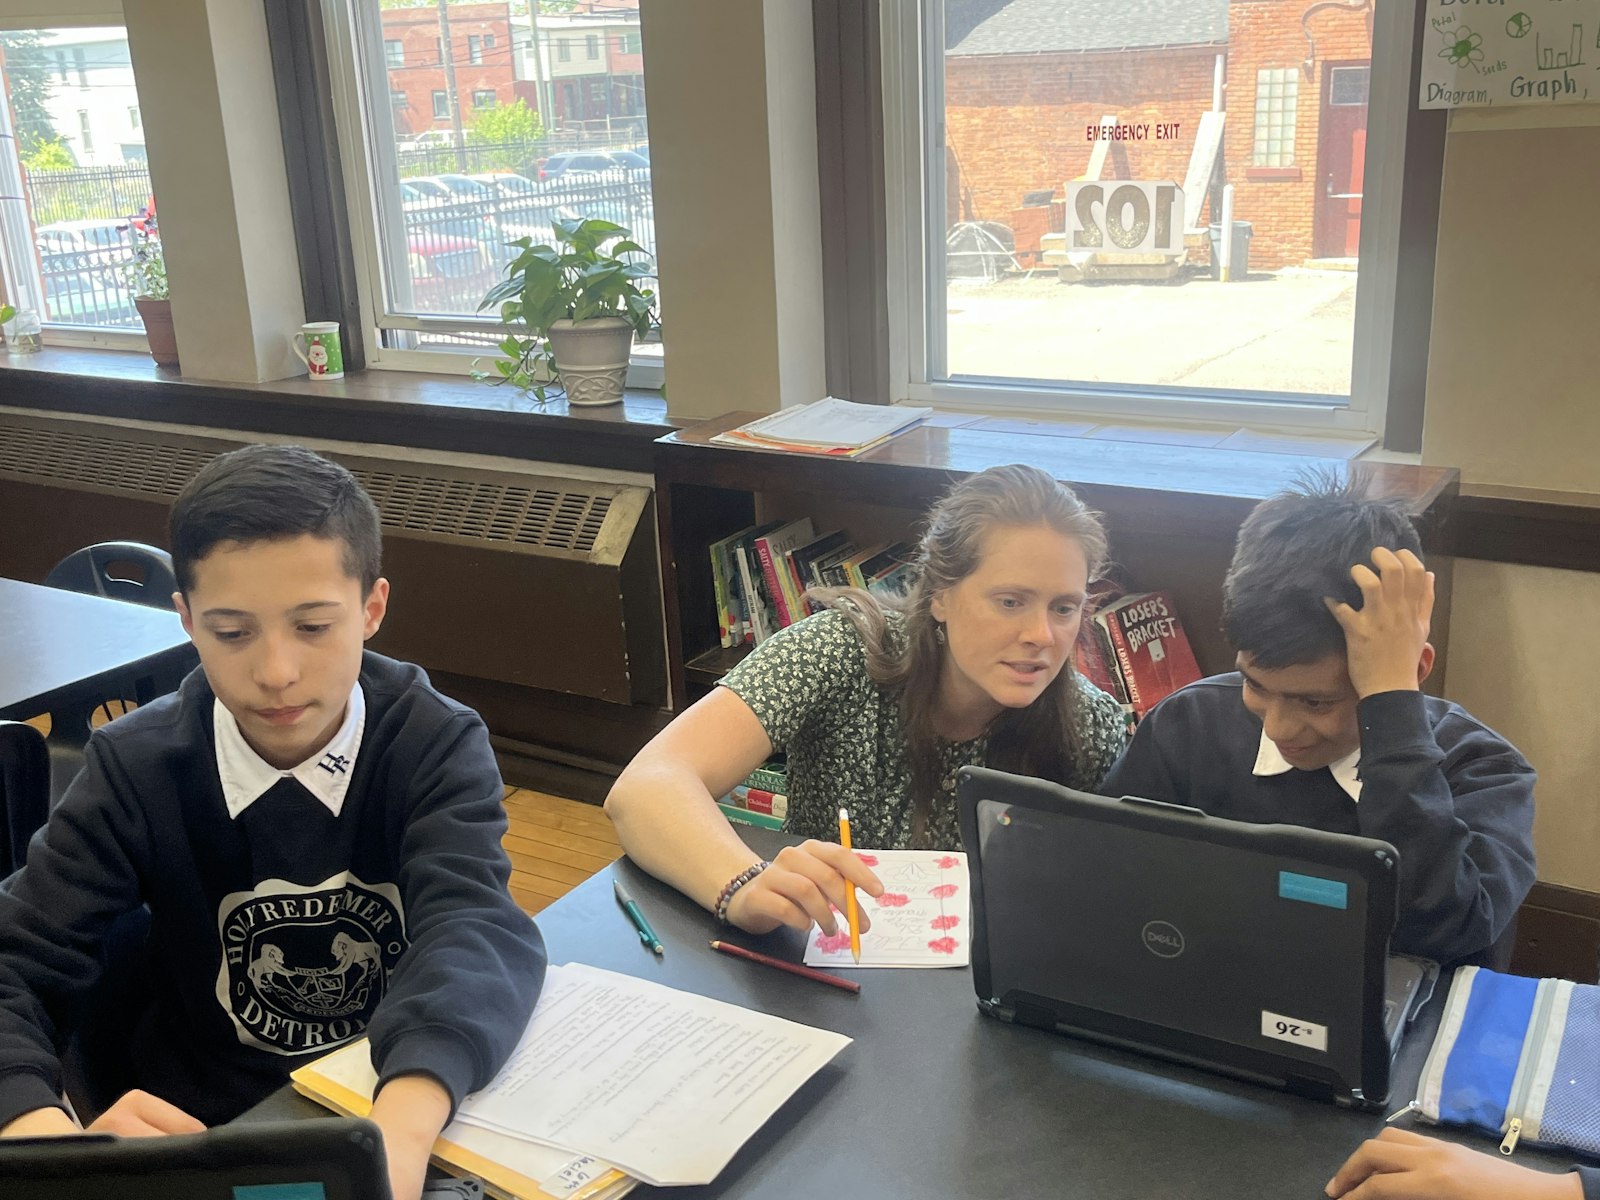 Claire McElroy works with a student in her sixth-grade class. McElroy obtained an education degree from the University of Alaska-Fairbanks before coming to Michigan and serving as one of the first SOLT missionaries to serve in Detroit. She plans to enter the SOLT aspirancy program.